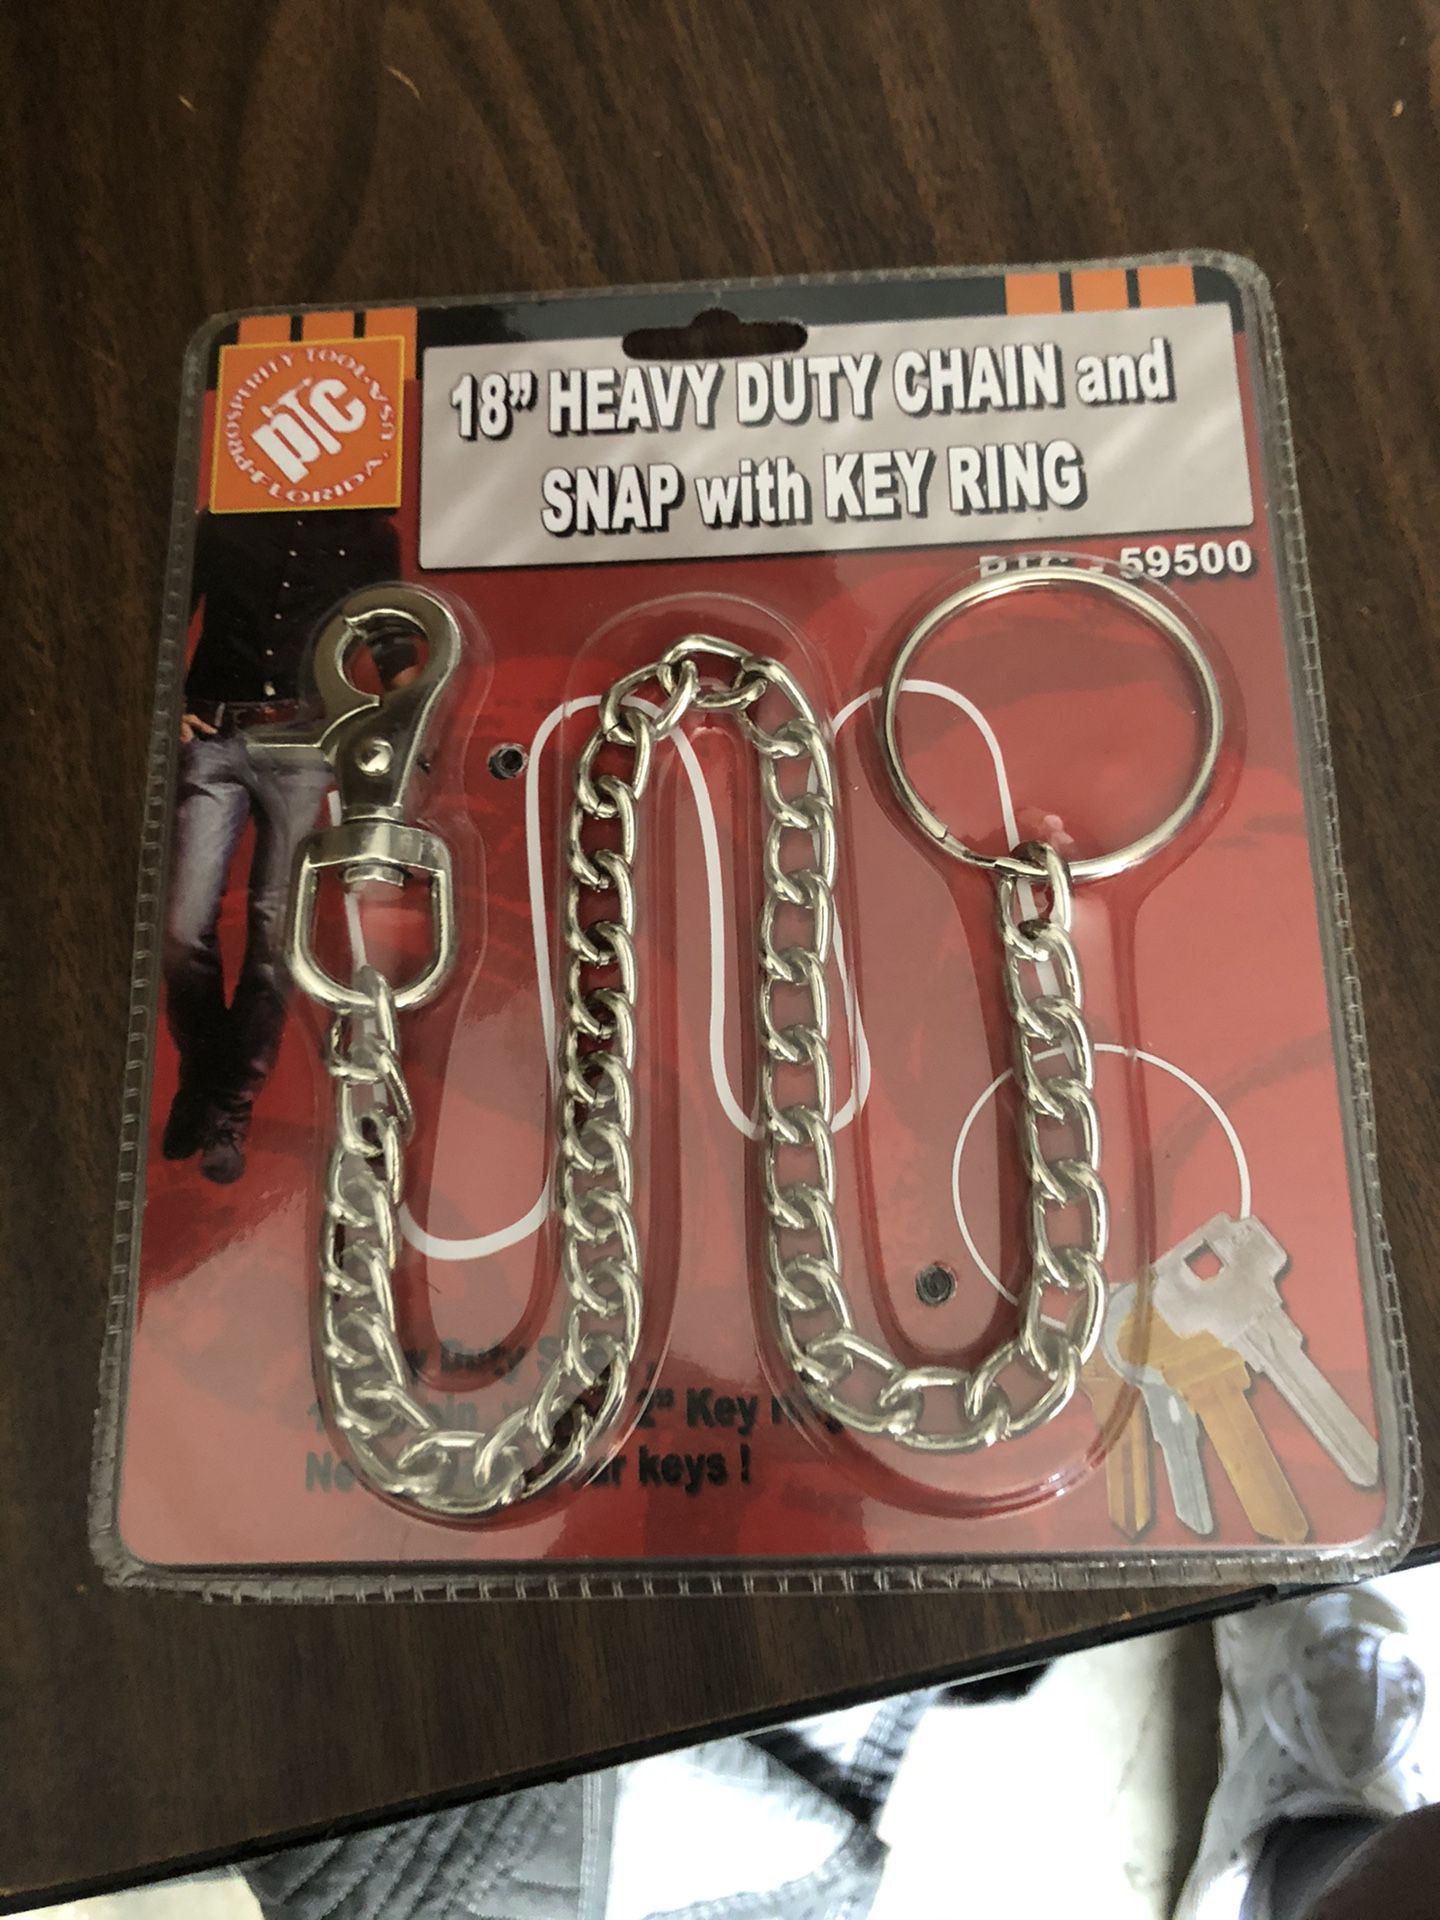 Prosperity tools, heavy duty chain and snap with key ring